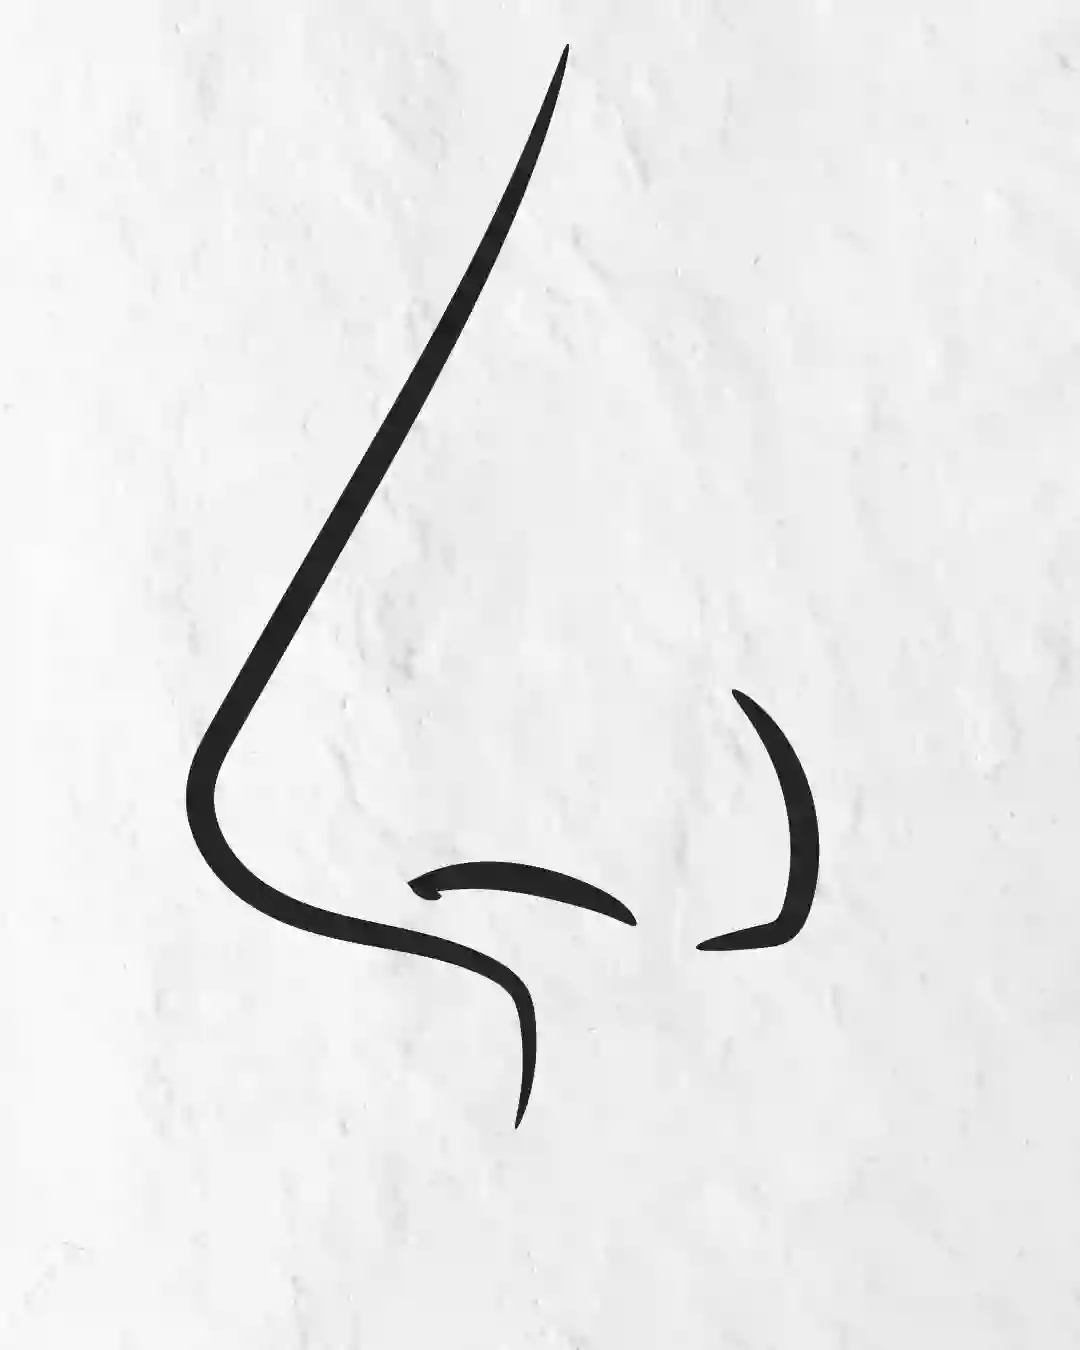 Nose Drawing - How to Draw a Nose - PRB ARTS